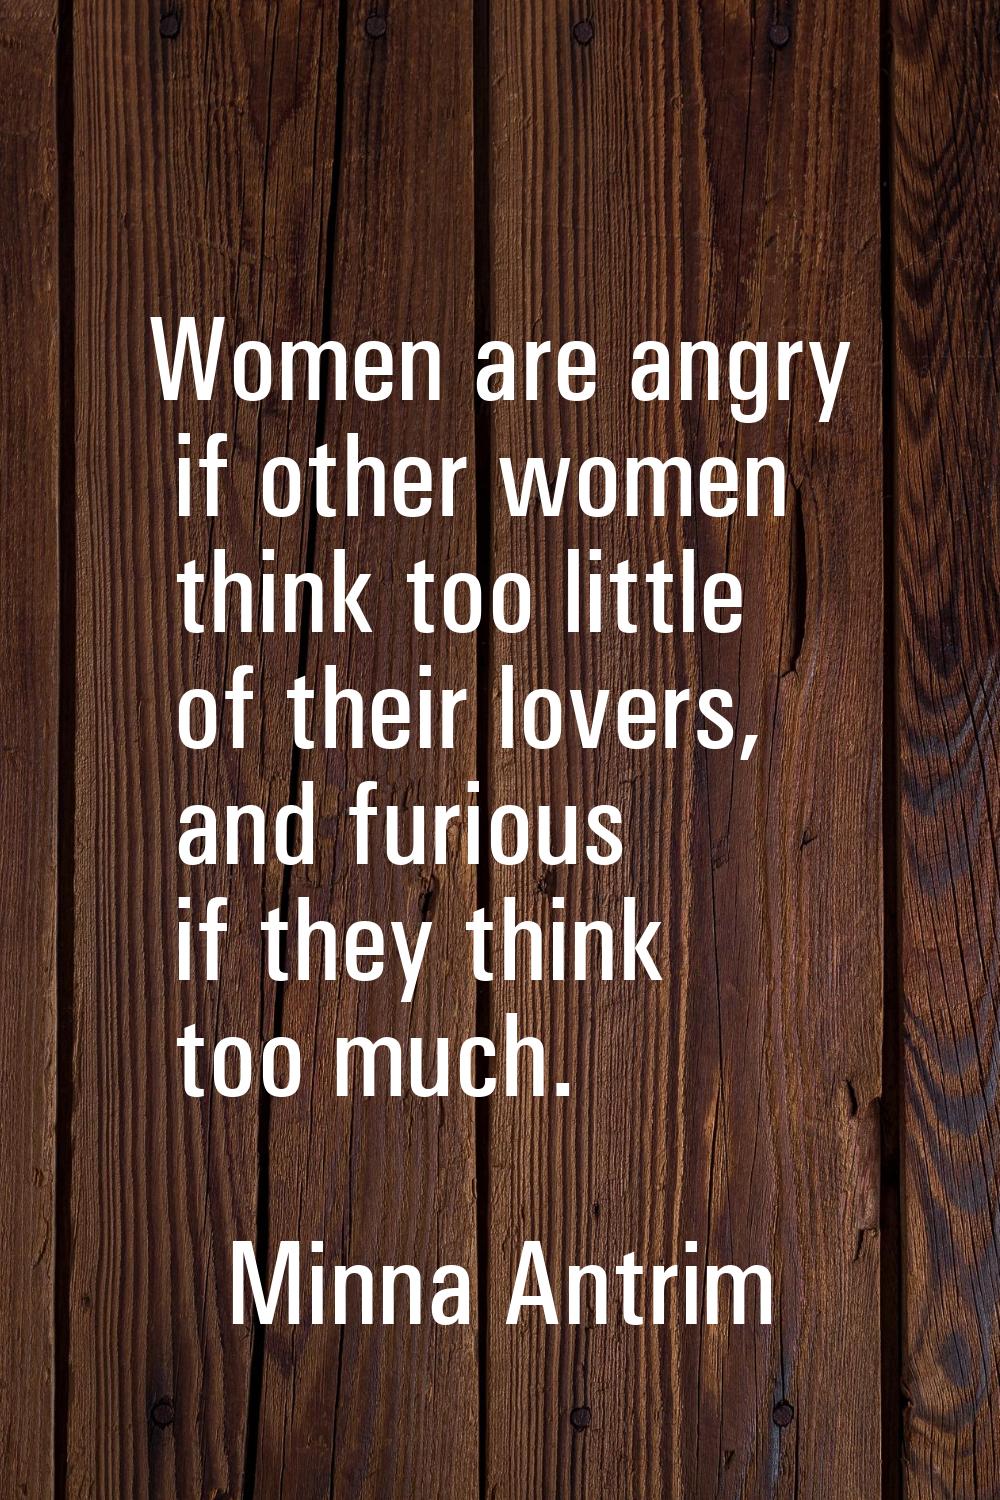 Women are angry if other women think too little of their lovers, and furious if they think too much